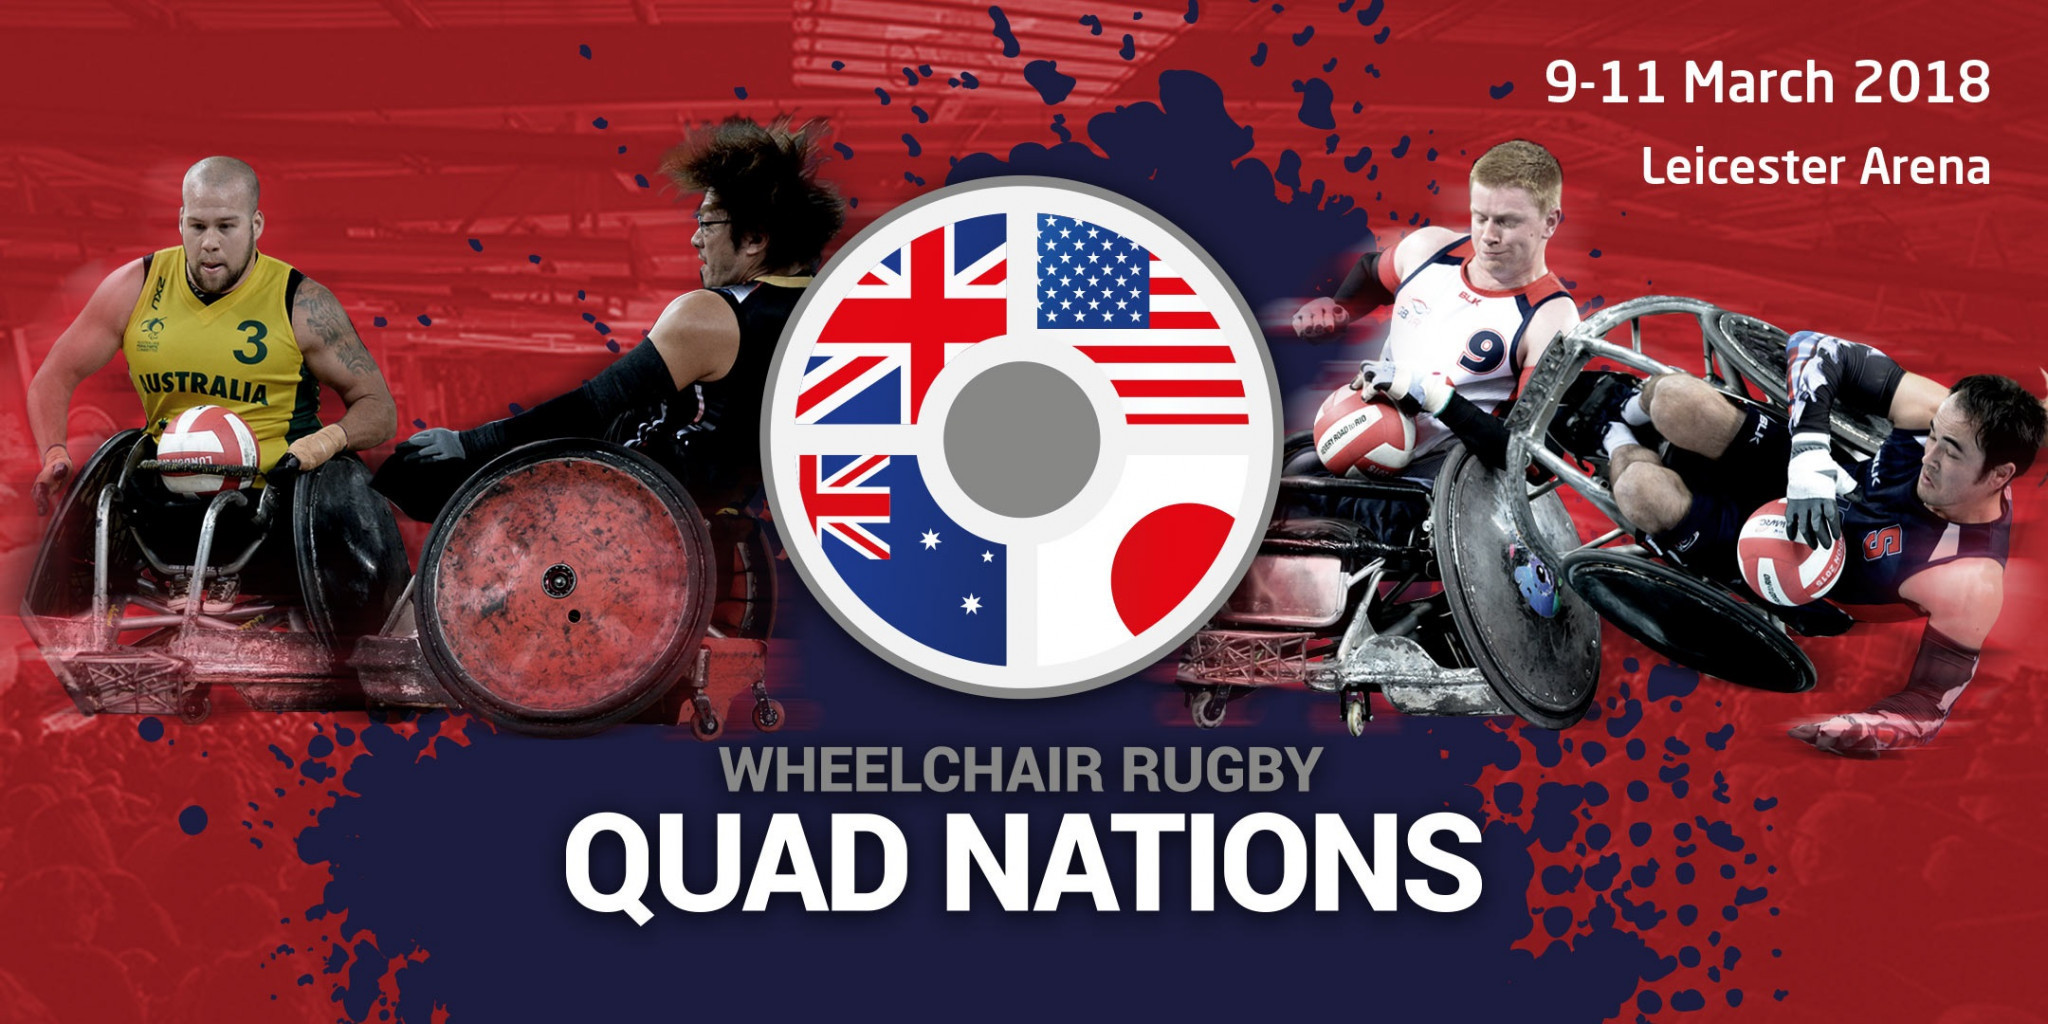 King Power named as title sponsor of inaugural Wheelchair Rugby Quad Nations tournament